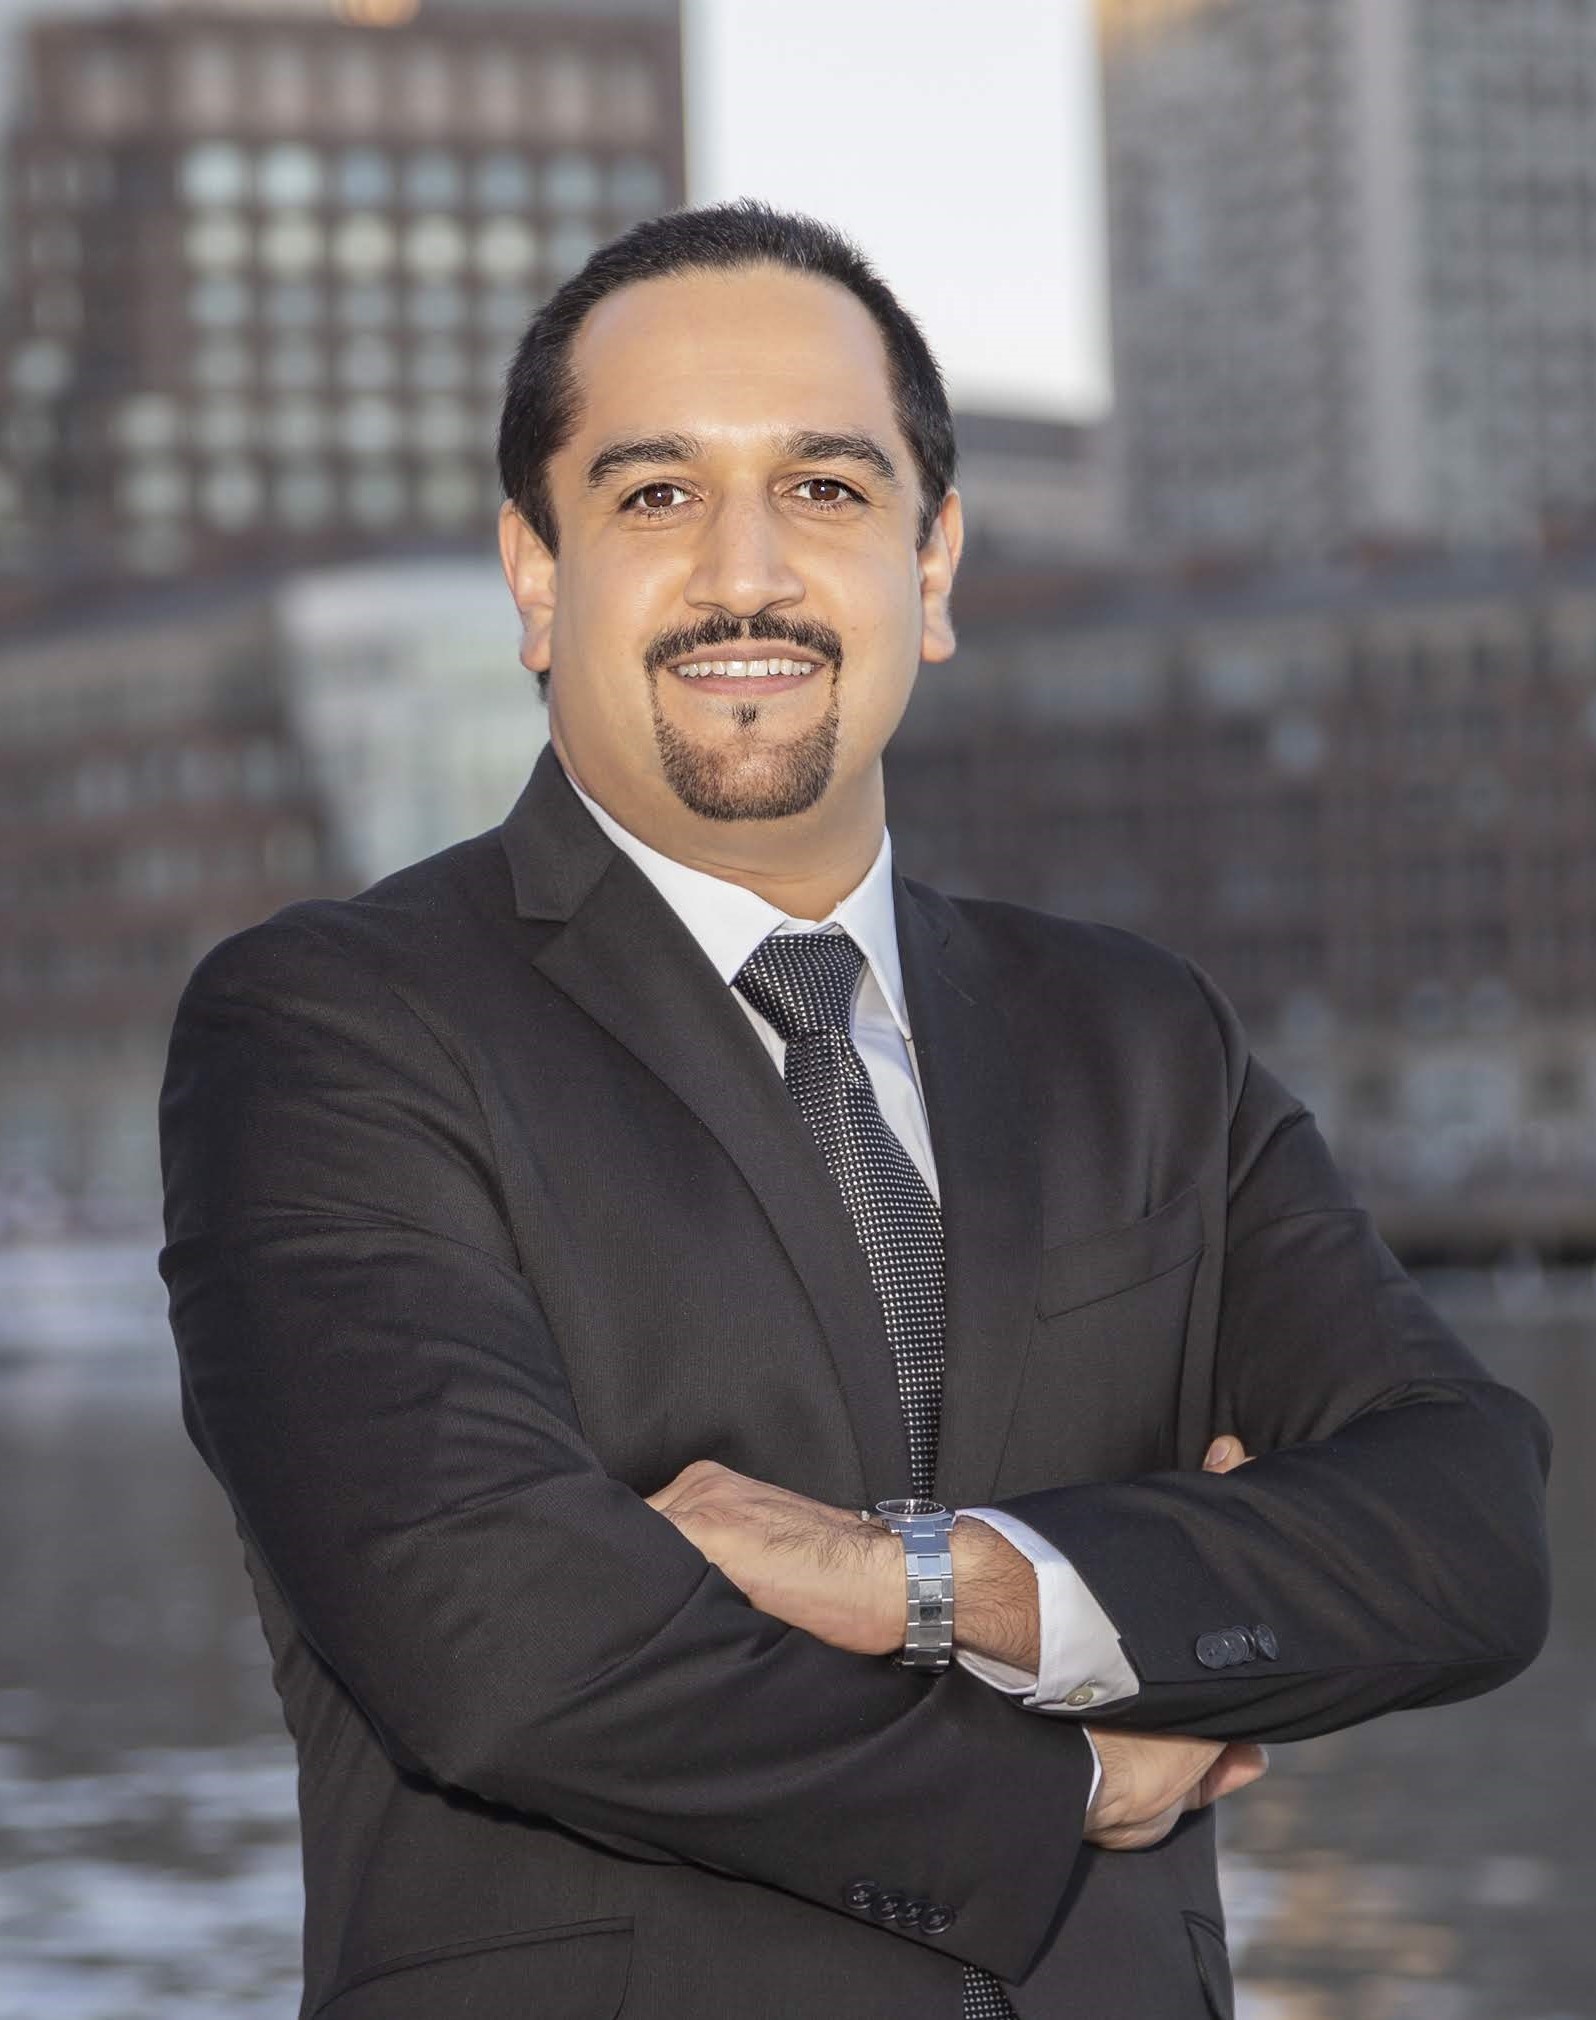 A photo of Hamed Okhravi. He is wearing a suit, with his arms crossed, with city buildings in the background. 